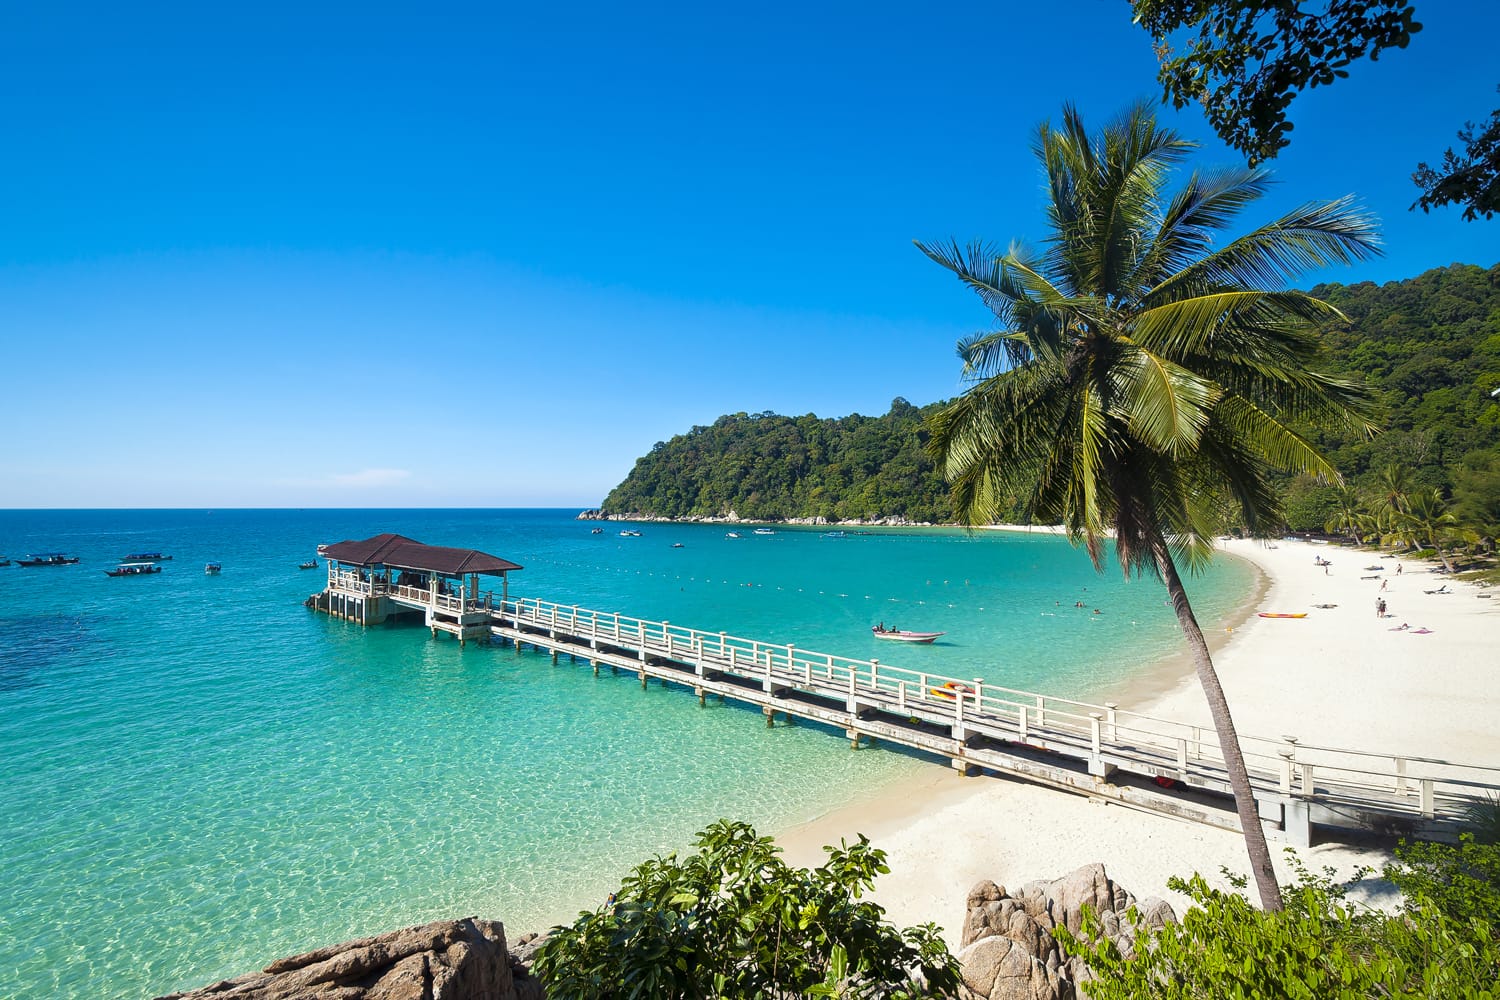  The beautiful island of Pulan Perhentian with its turquoise water and white sand beaches offers amazing snorkelling for tourists.